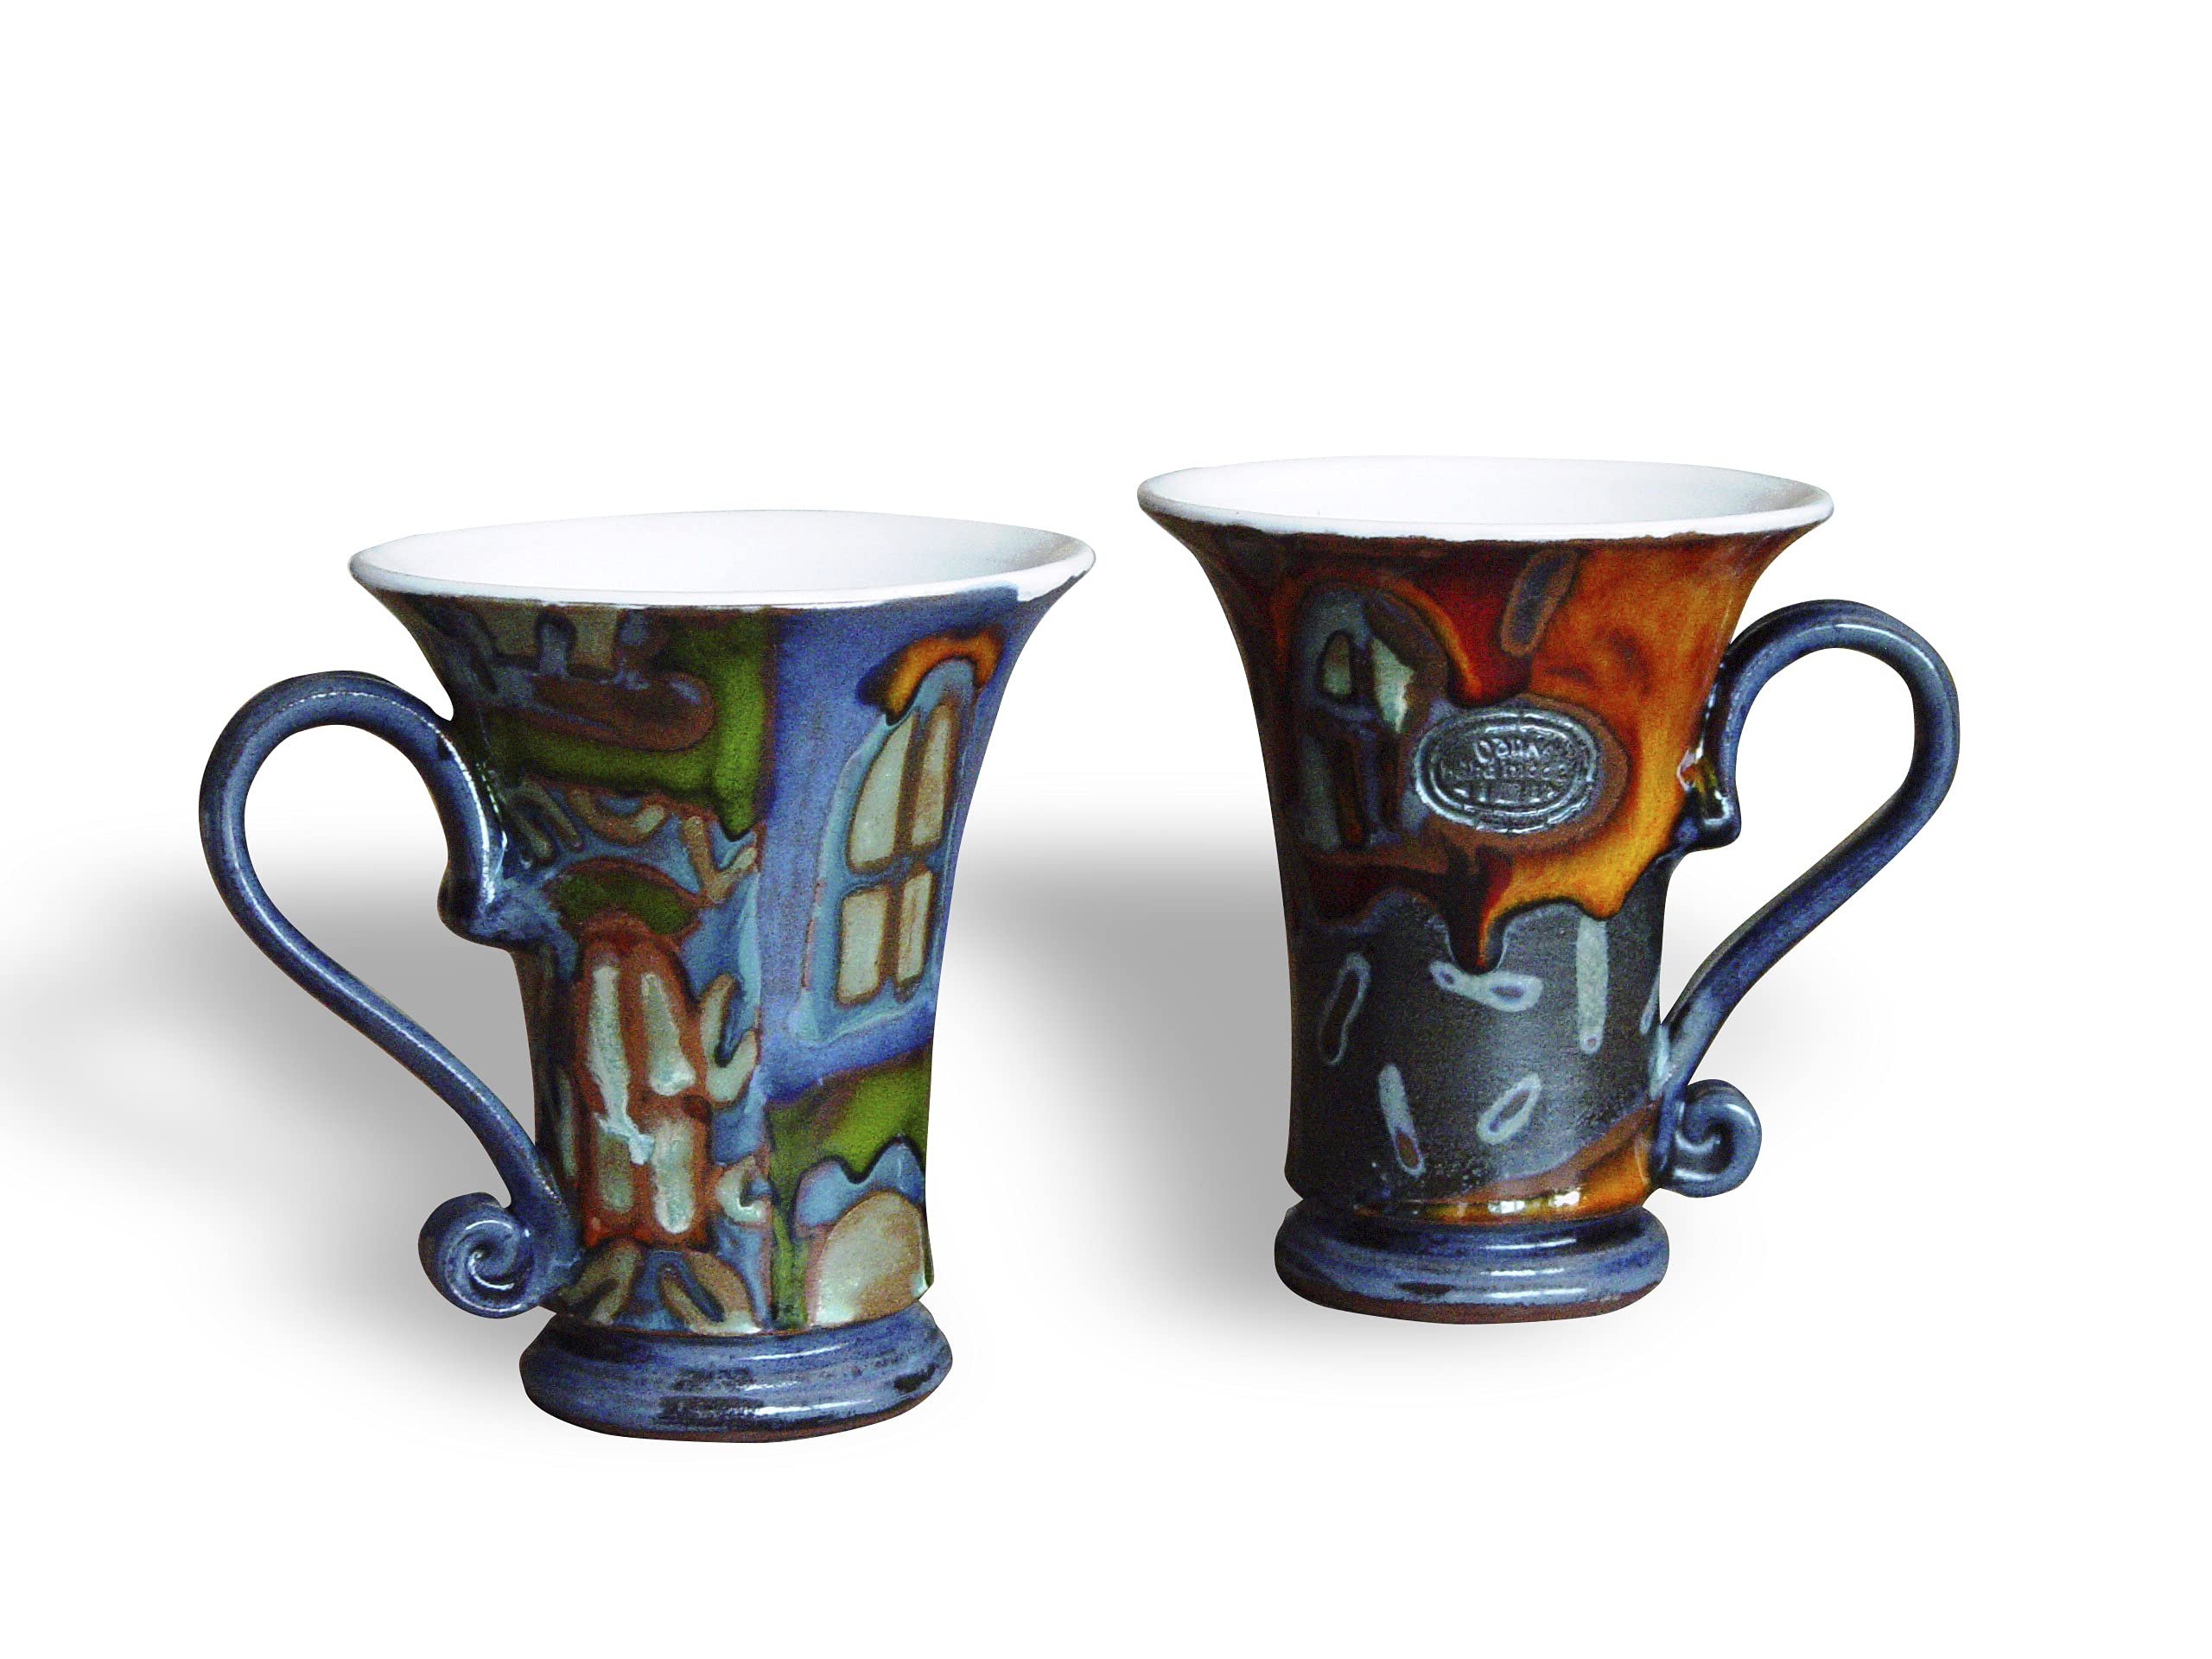 Set of Two Coffee Mugs, Colorful Ceramic Mugs with Unique Hand Painted Decoration, Danko Pottery